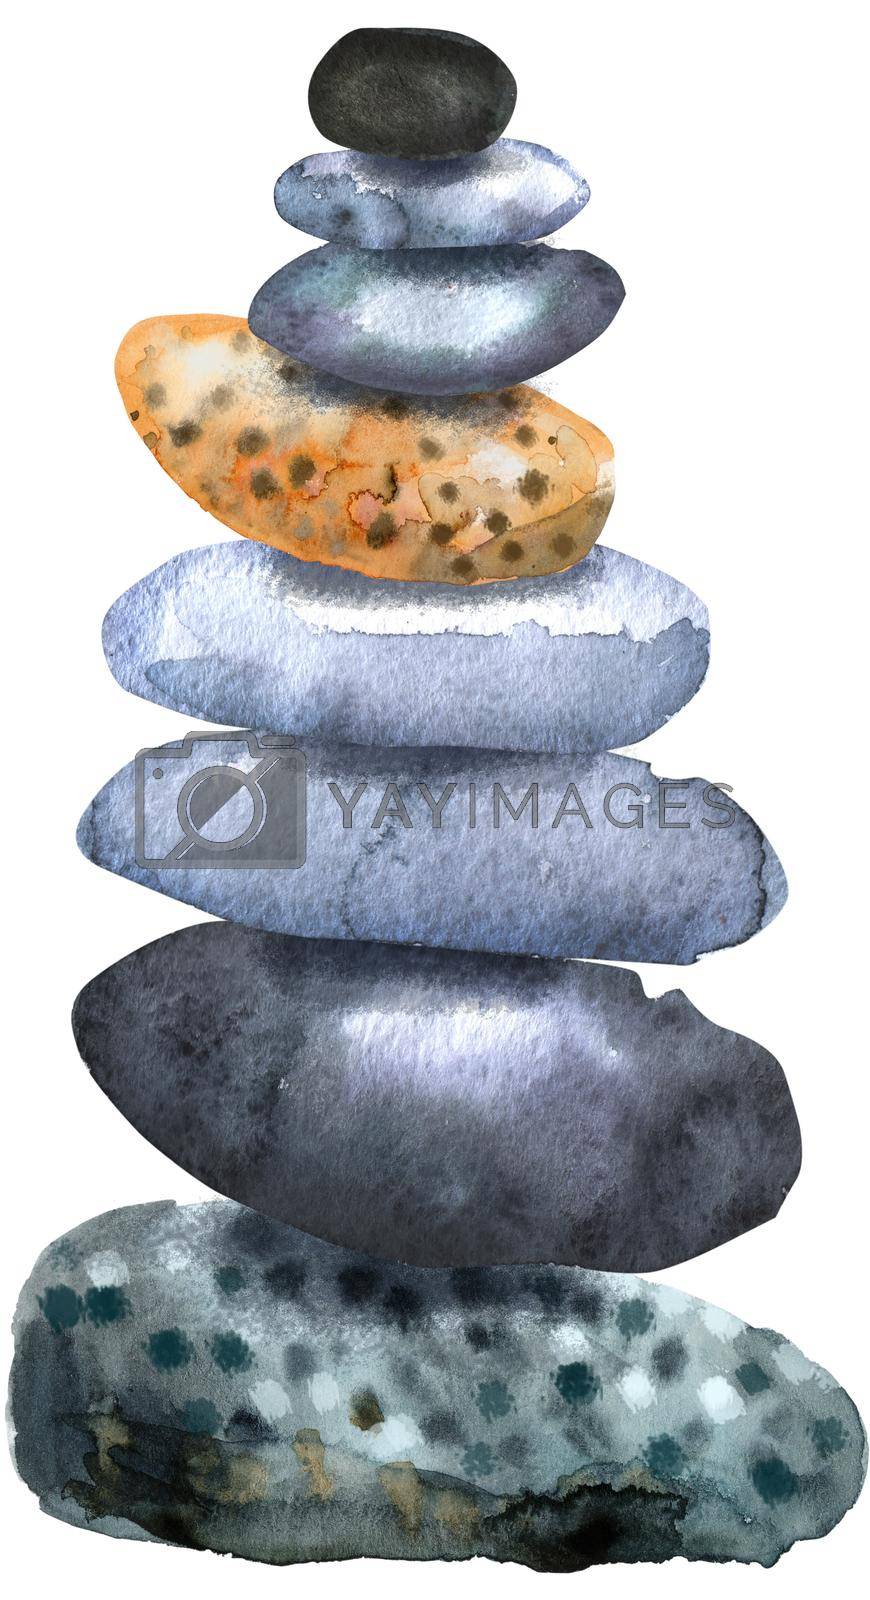 Royalty free image of Watercolour painting of a stack of flat pebbles by NataOmsk